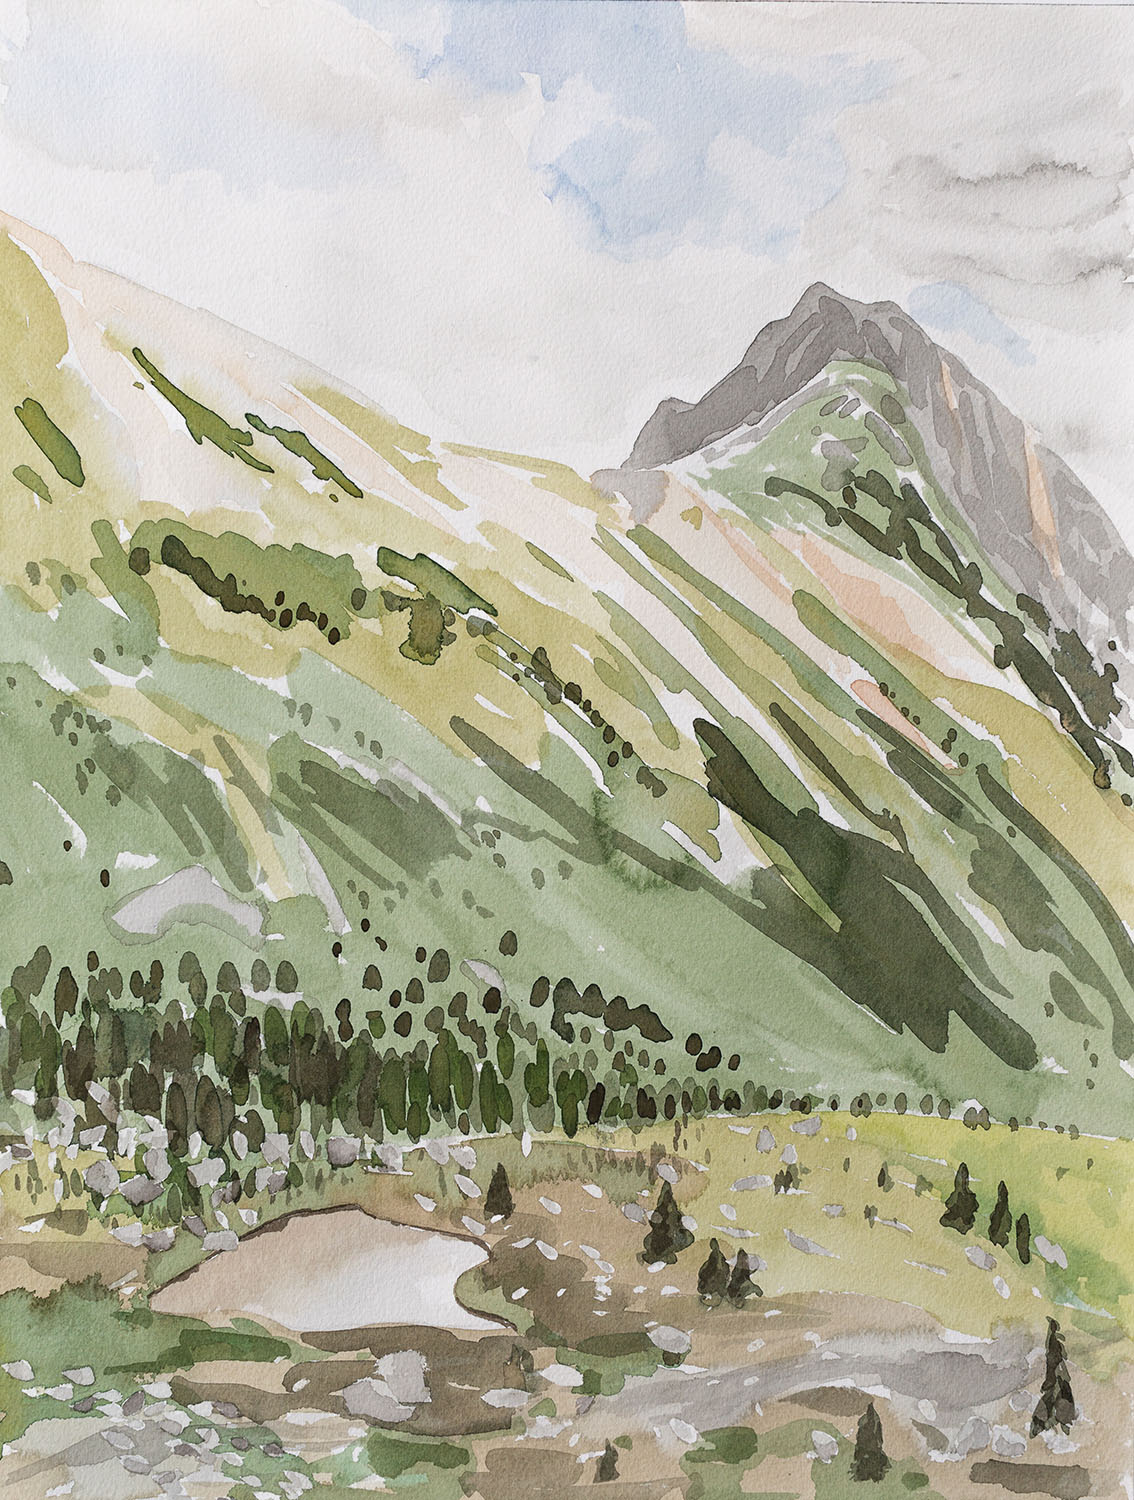 The Land Spoke is a watercolour landscape of the head of the Cotton Wood Drainage in the Northern Stein, BC